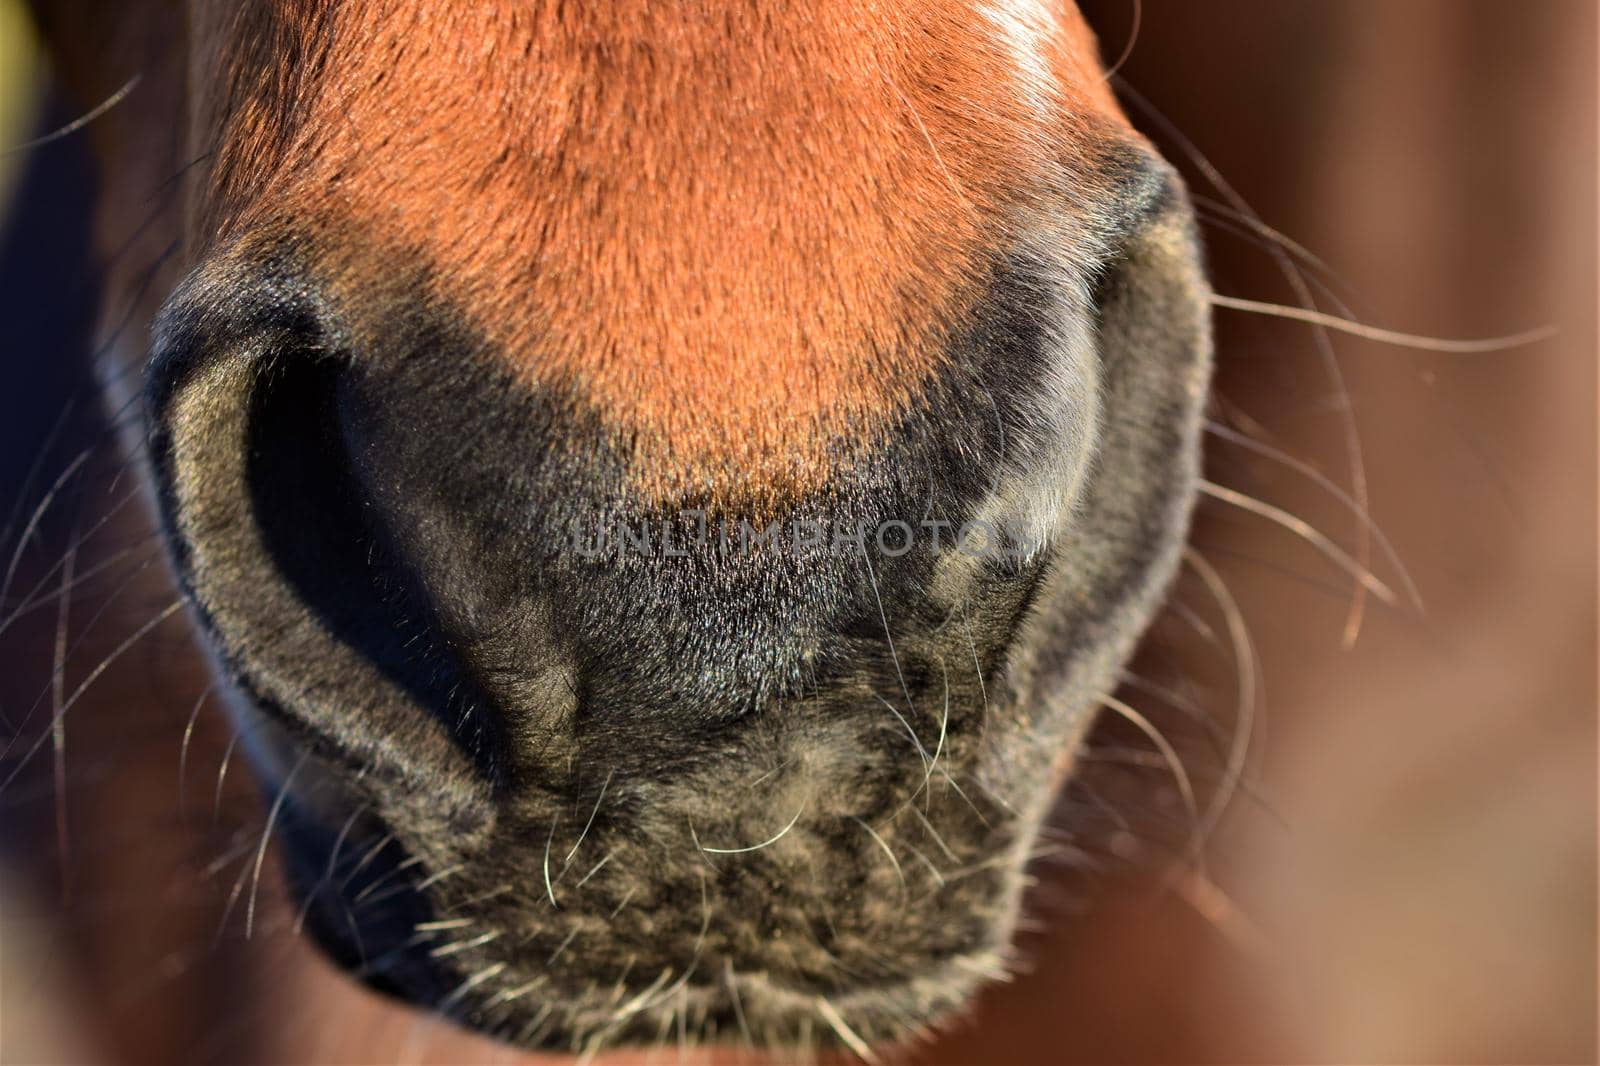 Nose of a brown horse as a close-up